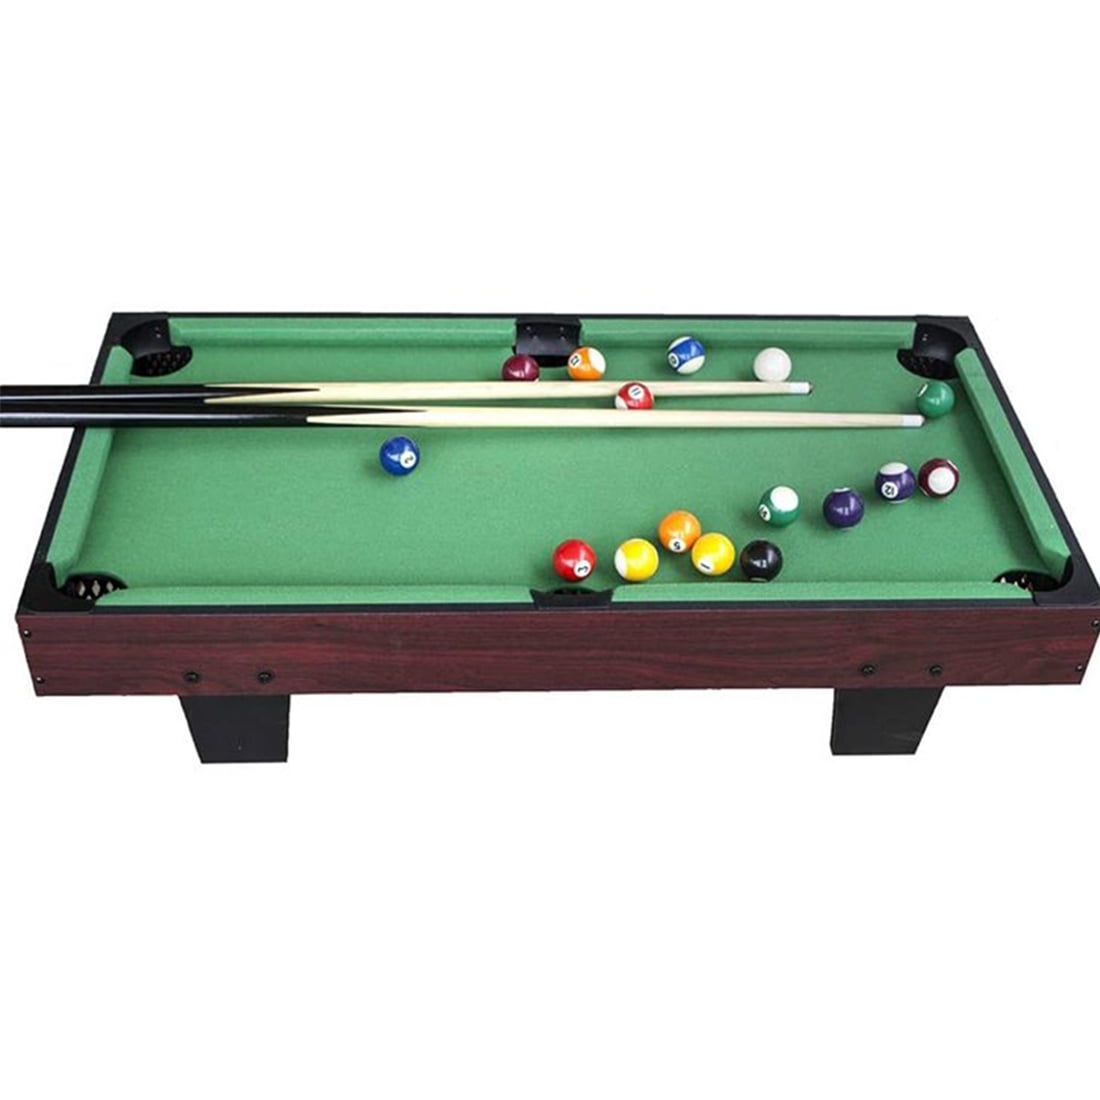 2 x 36 inch pool 7 tips; ideal 1st cue for child or for tight snooker cues 